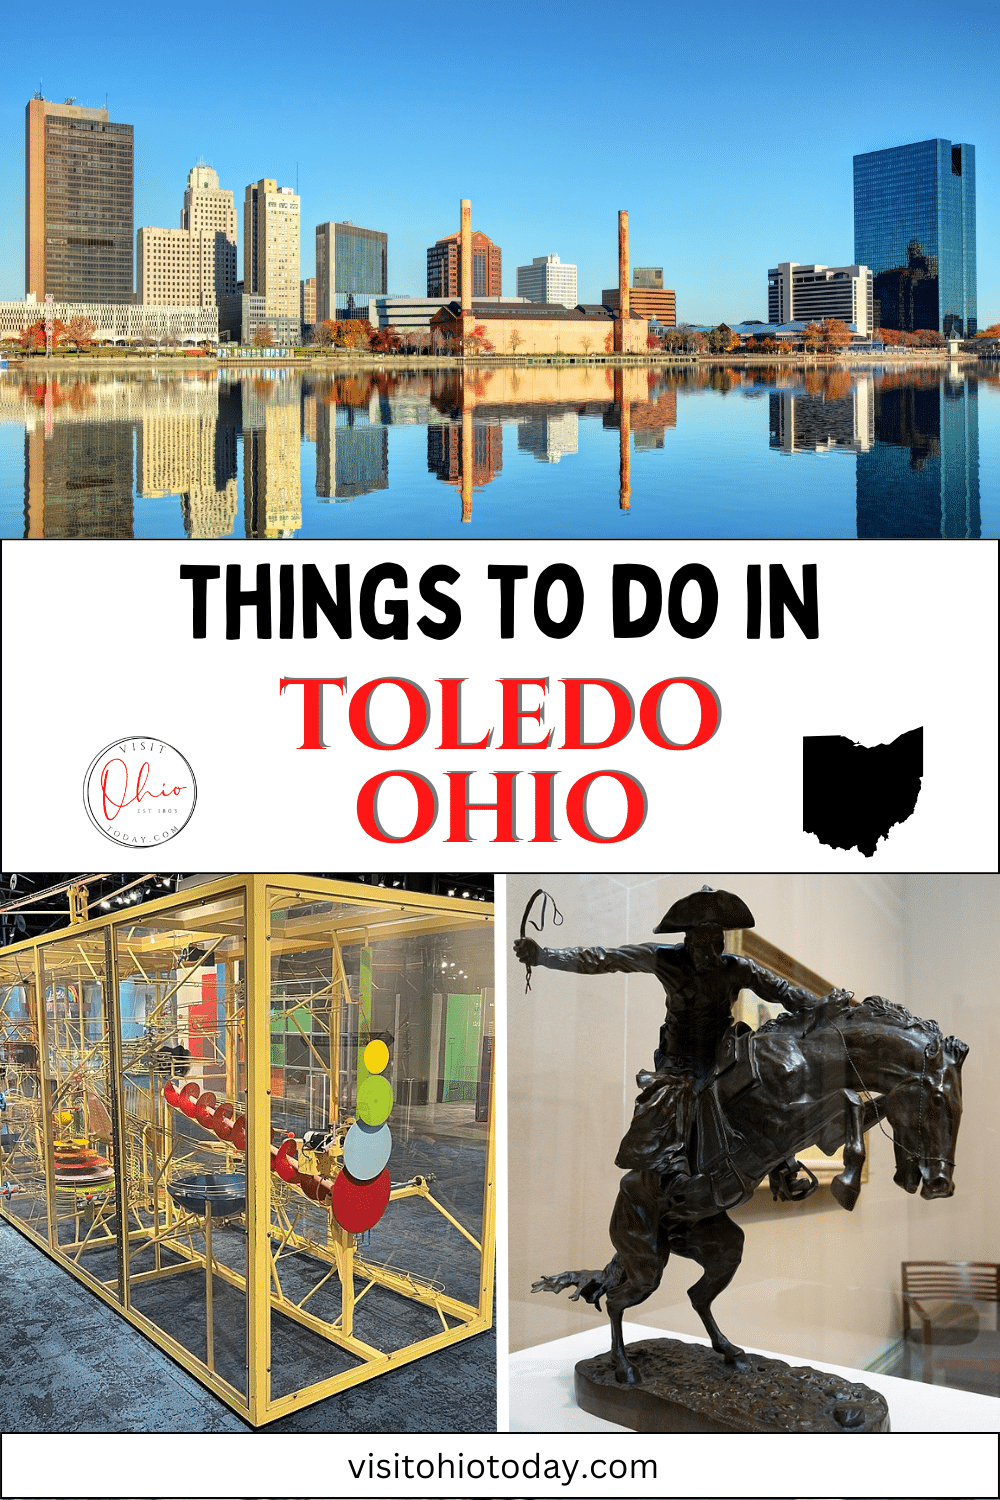 Toledo is a vibrant city with a rich history and stunning Lake Erie views. Explore endless Things to Do in Toledo, Ohio, and enjoy diverse cuisine, cultural attractions, and sports events in this Midwest gem!